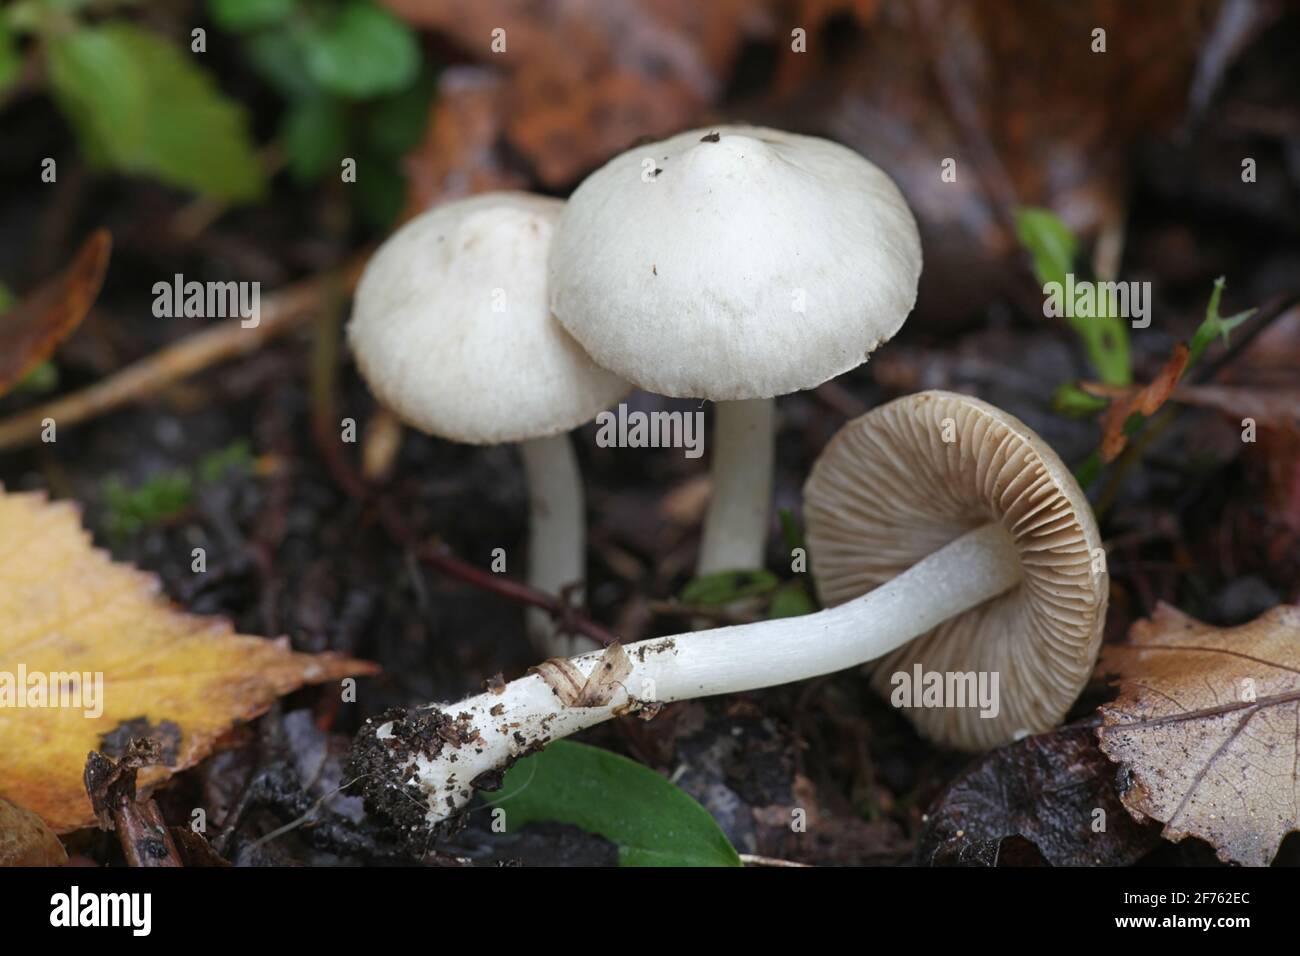 Inocybe geophylla, commonly known as the earthy inocybe, common white inocybe or white fibercap, wild mushroom from Finland Stock Photo